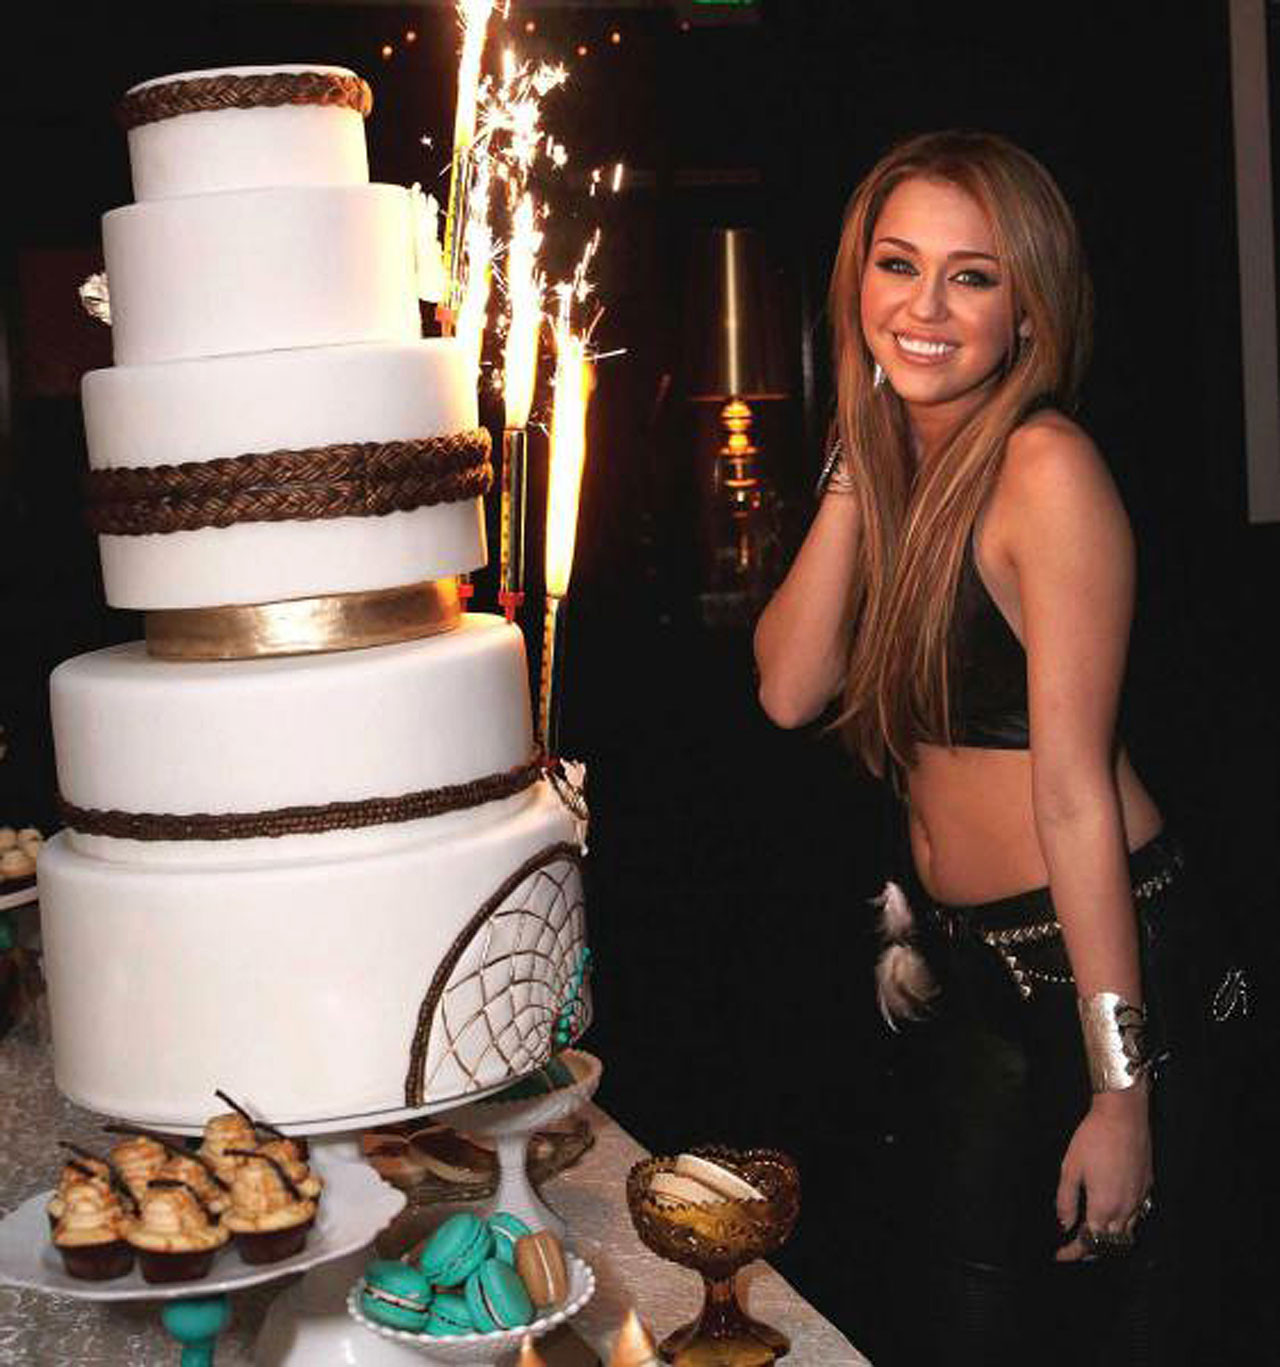 Miley Cyrus young and cute singer celebrated her eighteenth birthday #75325482